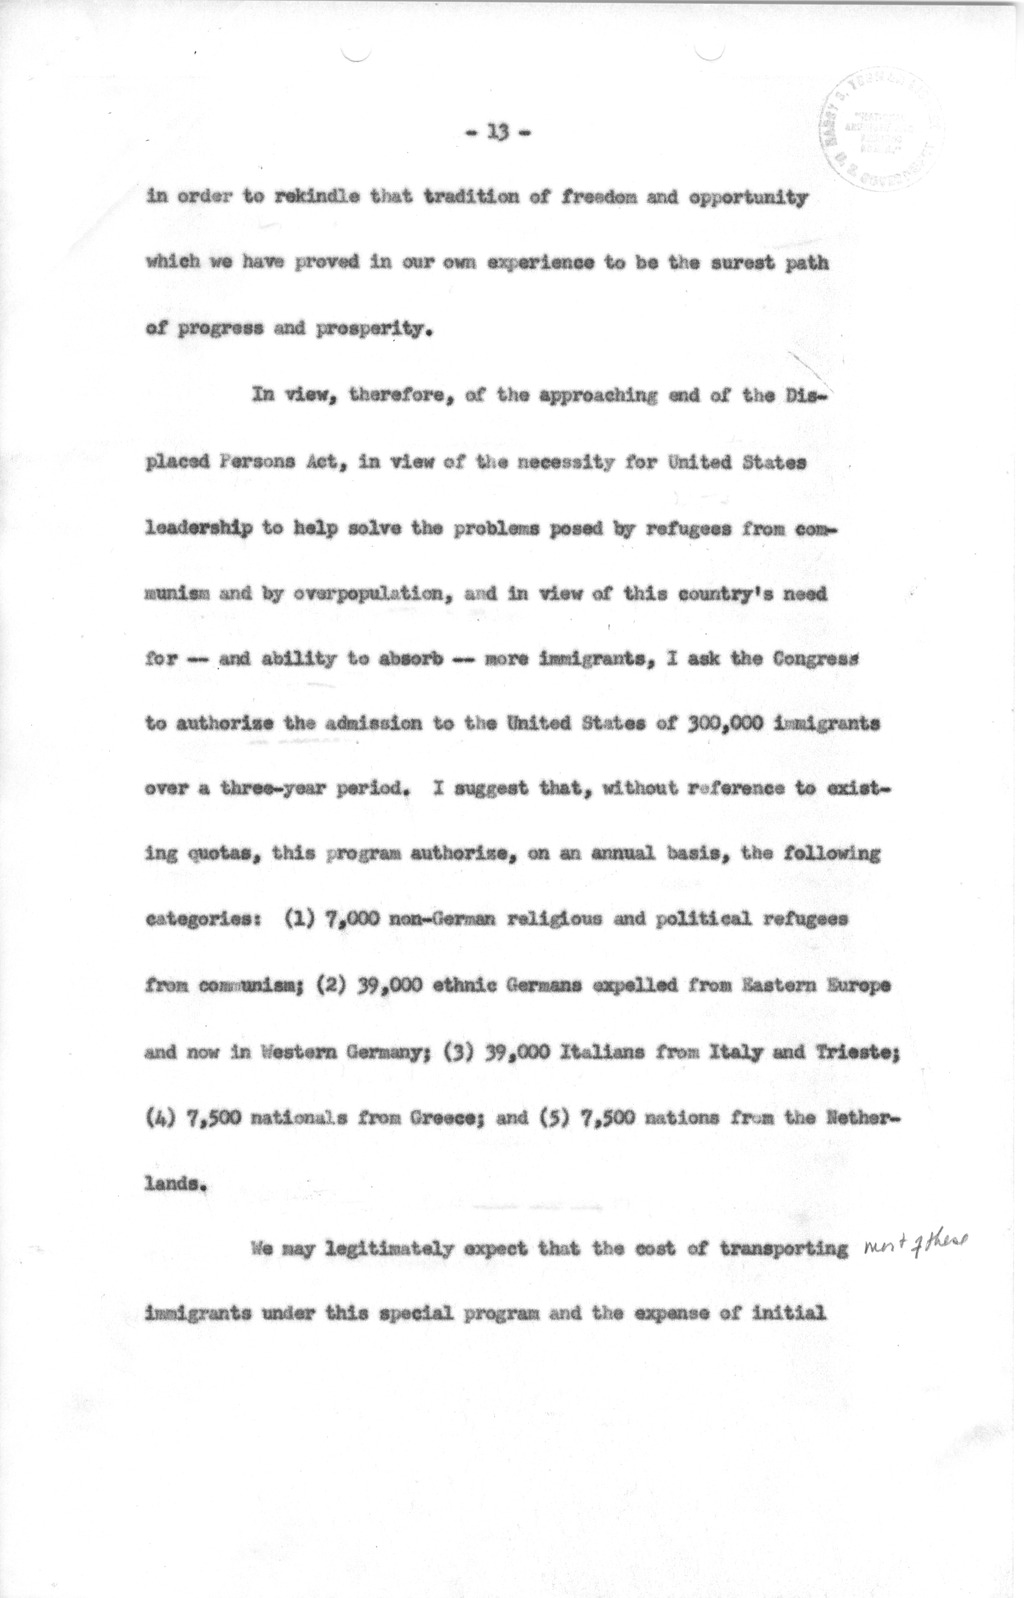 Memorandum from David Lloyd to Samuel Berger, with Attached Message Draft